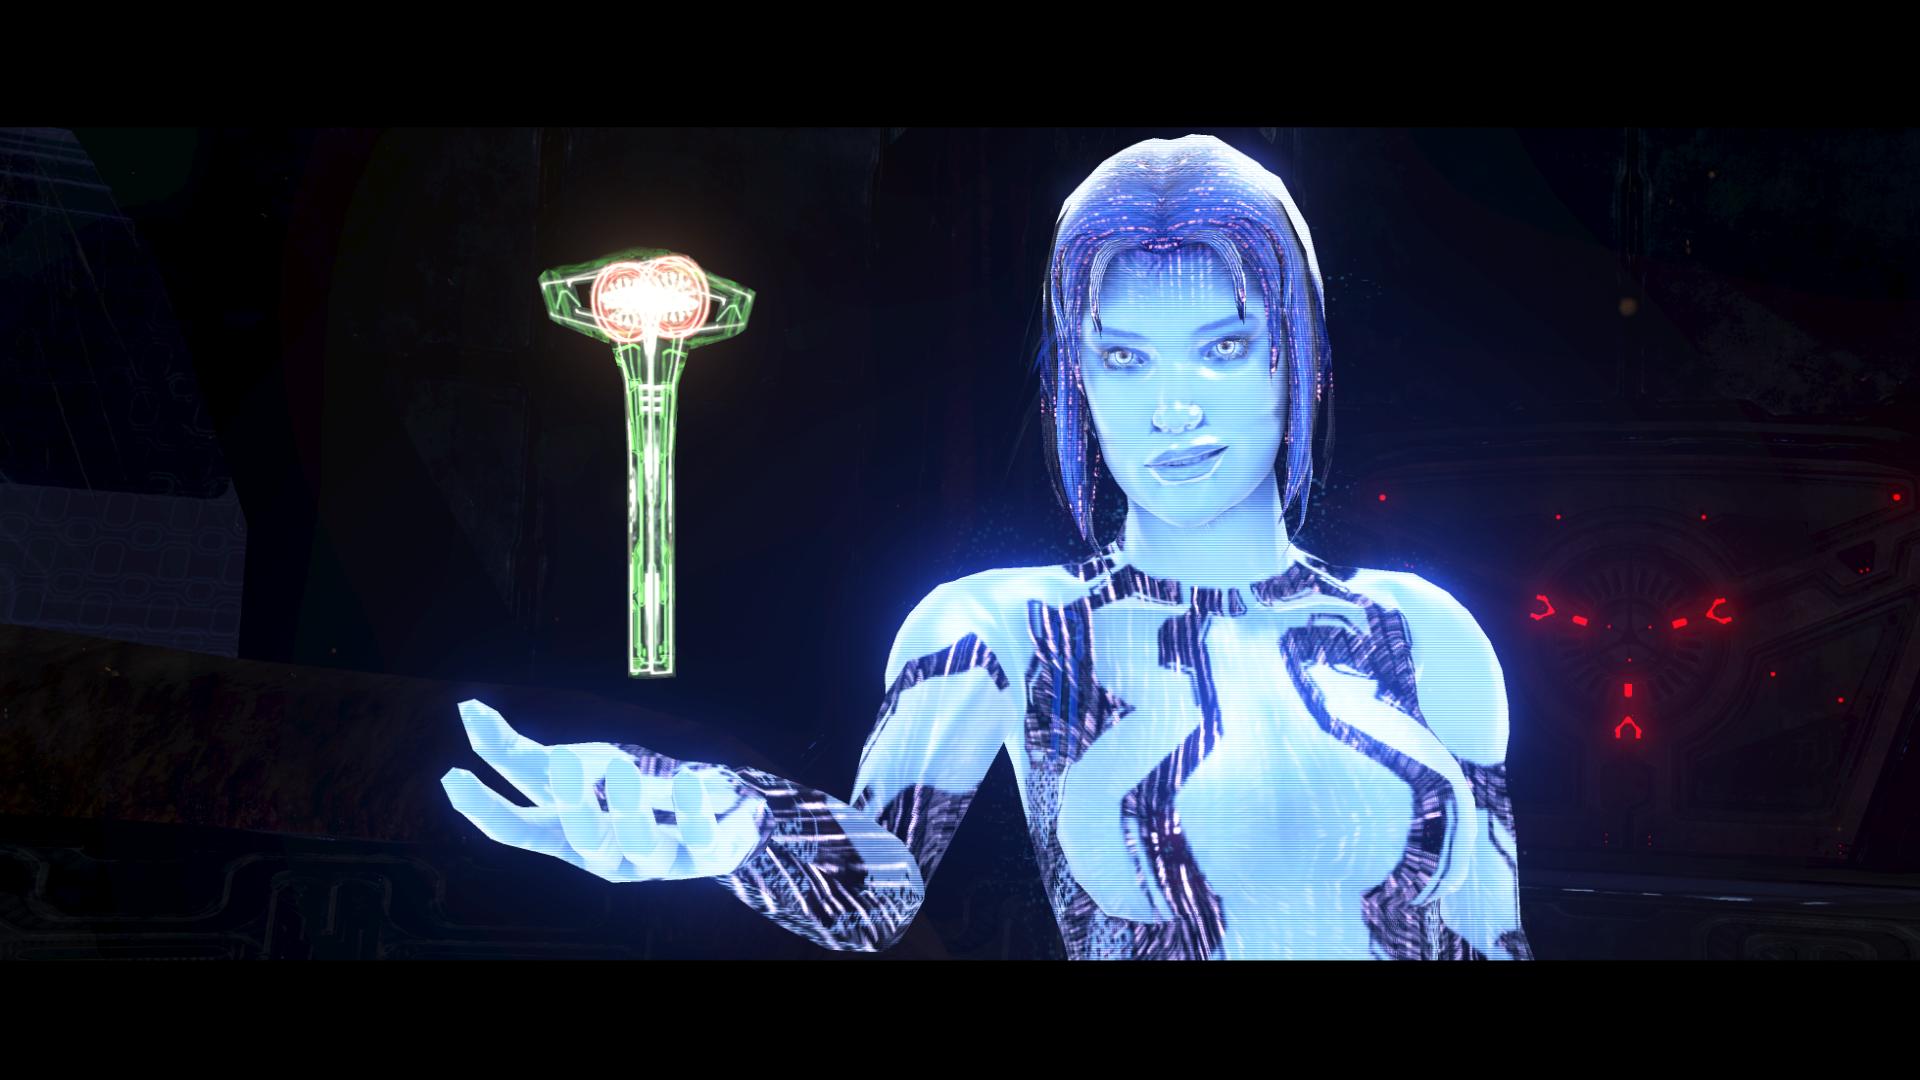 Download Cortana the AI Assistant in Halo Universe standing amidst a  digital background Wallpaper  Wallpaperscom